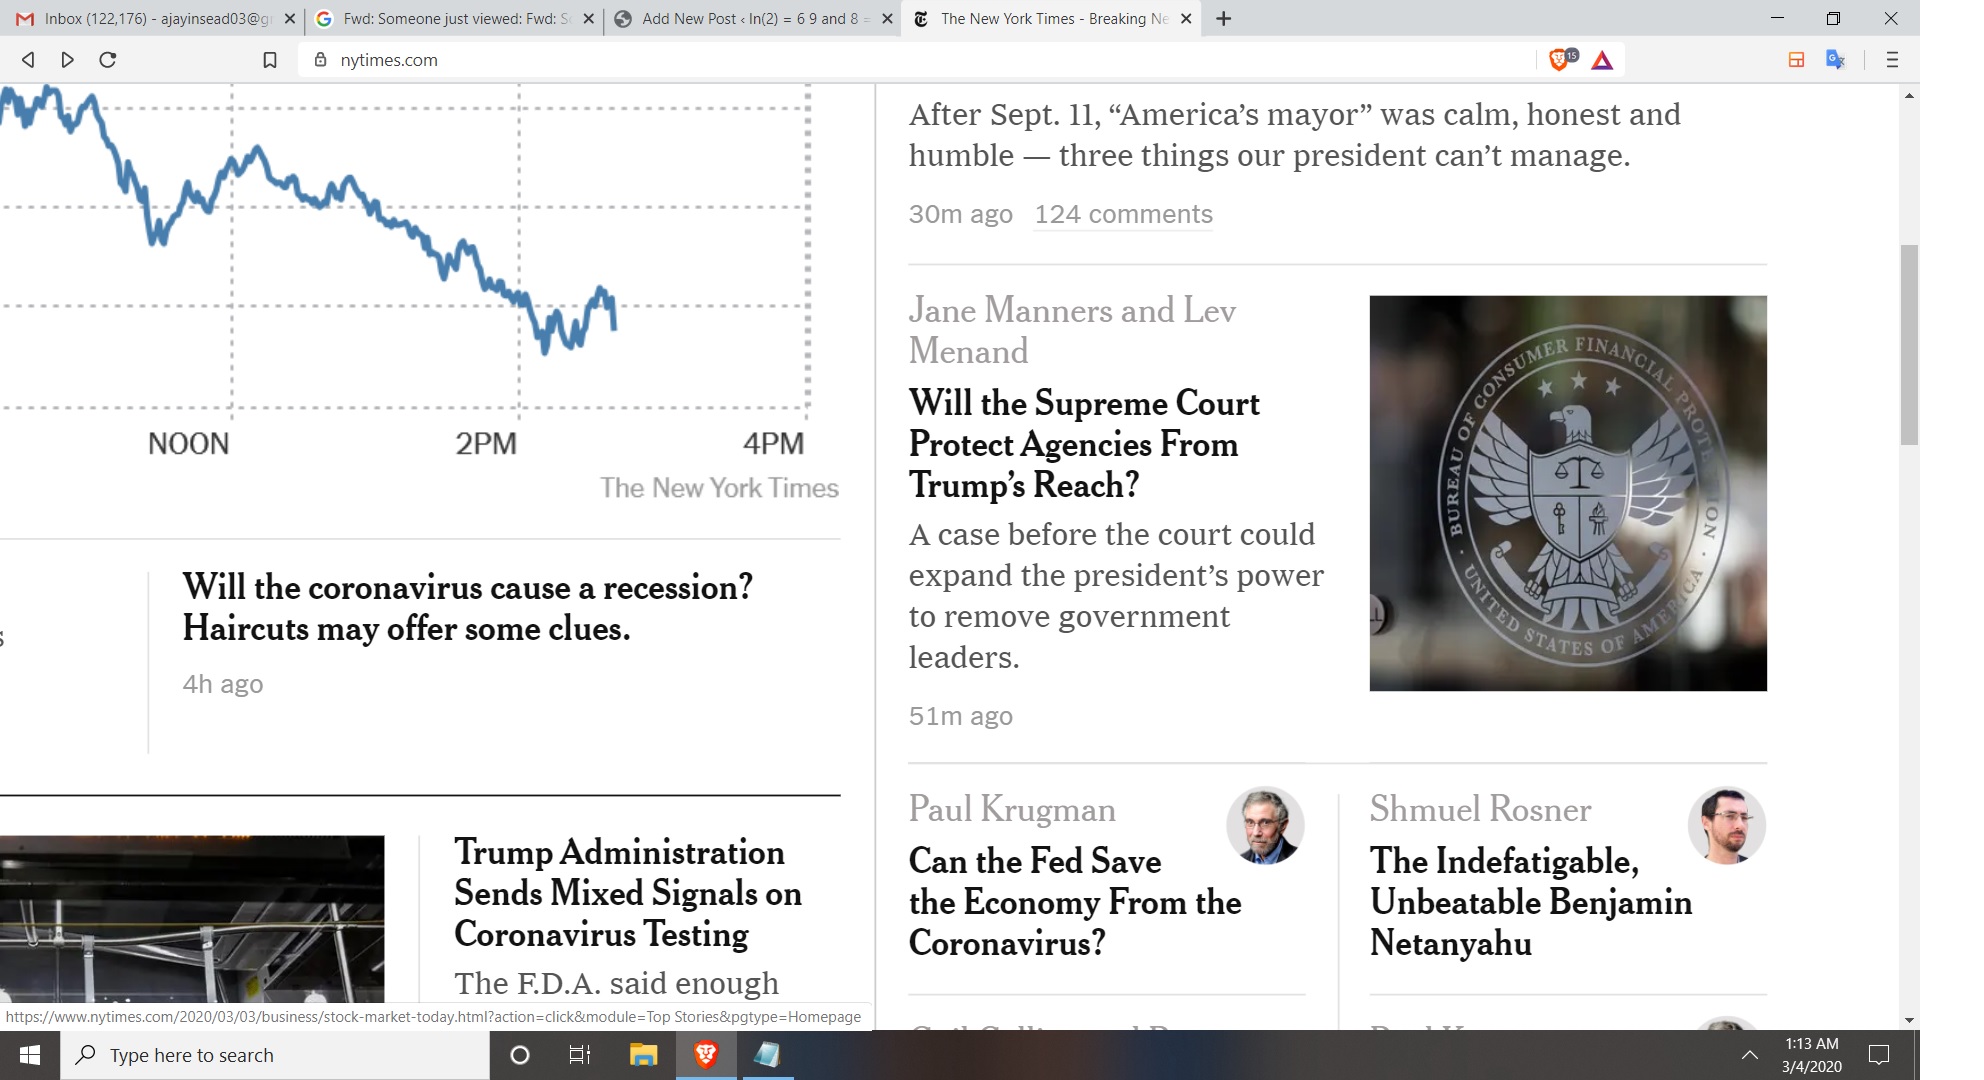 MARCH 3 SUPER TUESDAY MARCH 23 2020 NE WYORK TIMES DOWN AND S N P DOWN CHINA VARIS IS THE CAUSE THEY SAY FED CUT RATES DOWN